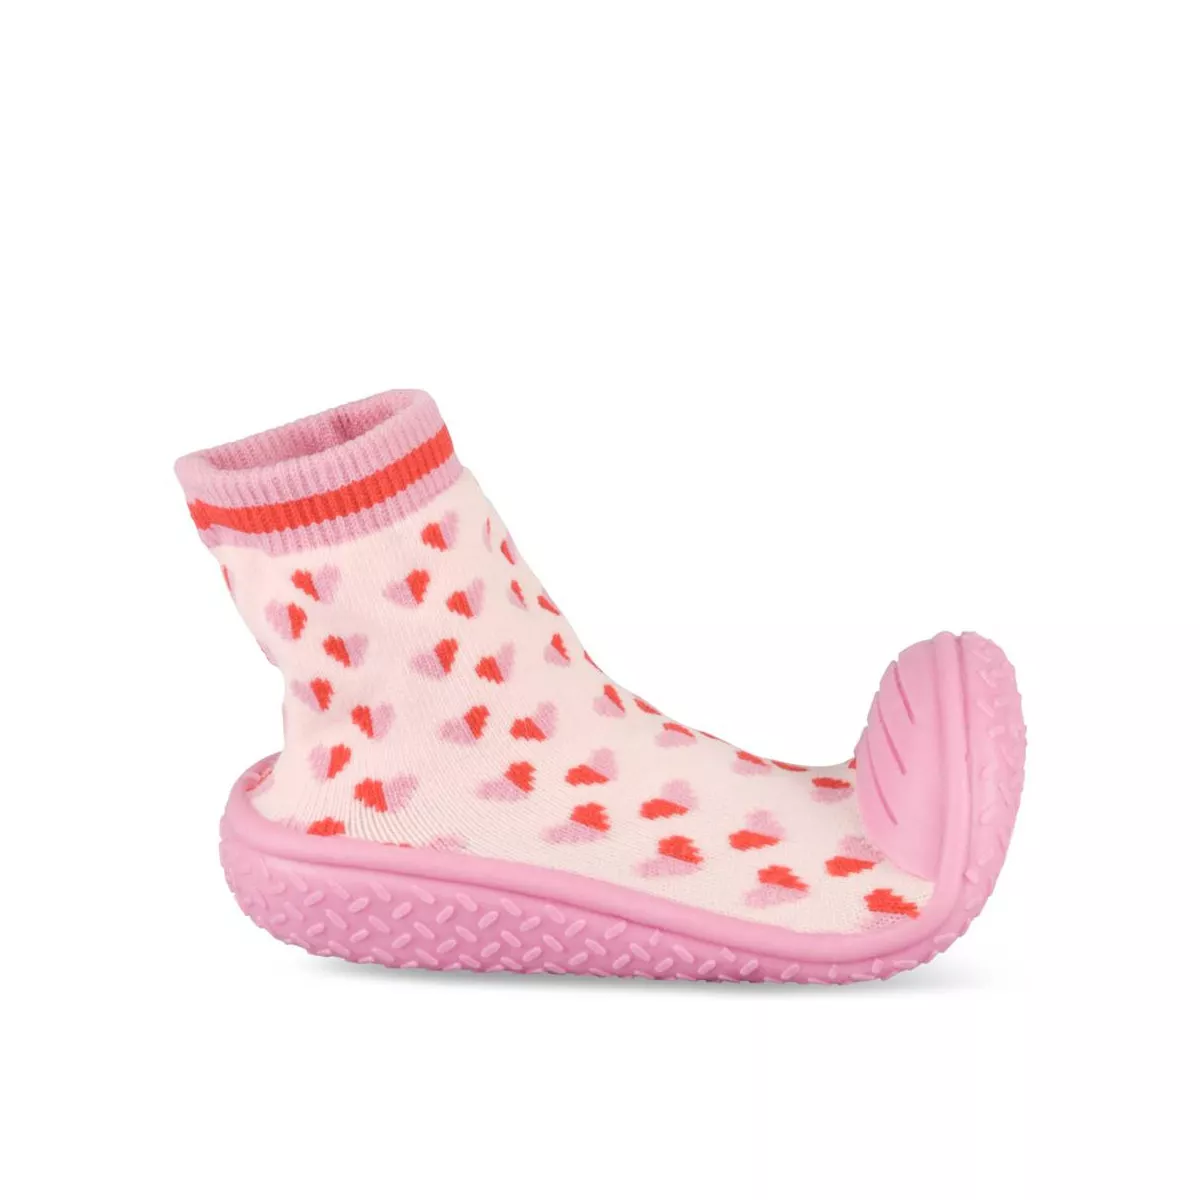 Chaussons Robeez rose nacre fille - SWALLOW FLIGHT ROSE CLAIR - 76318